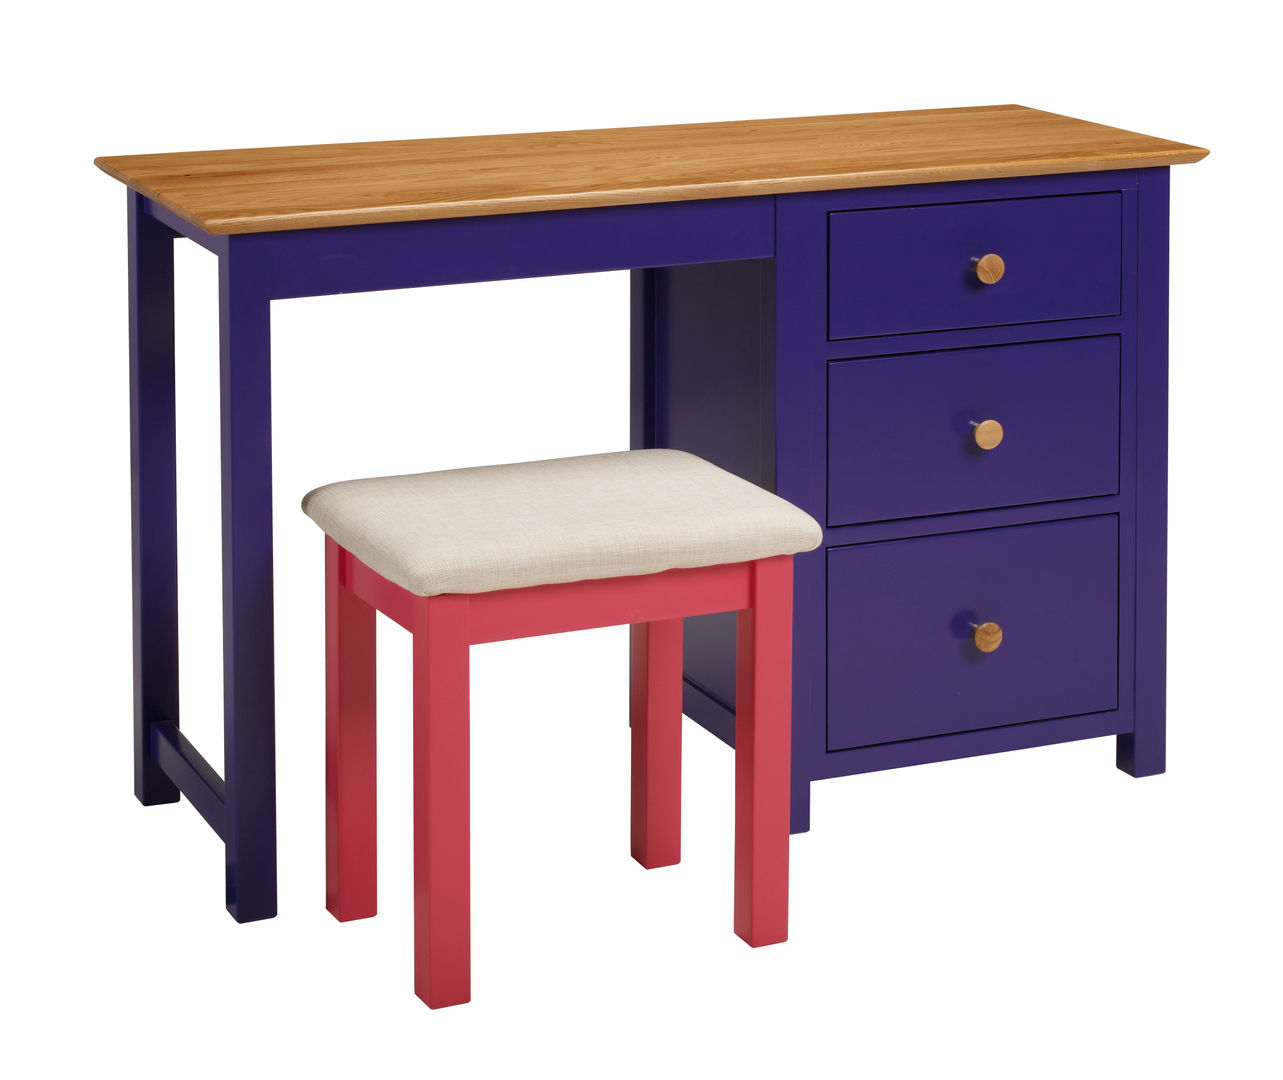 Cotsworld, The Painted Furniture Company The Painted Furniture Company مكتب عمل أو دراسة Desks